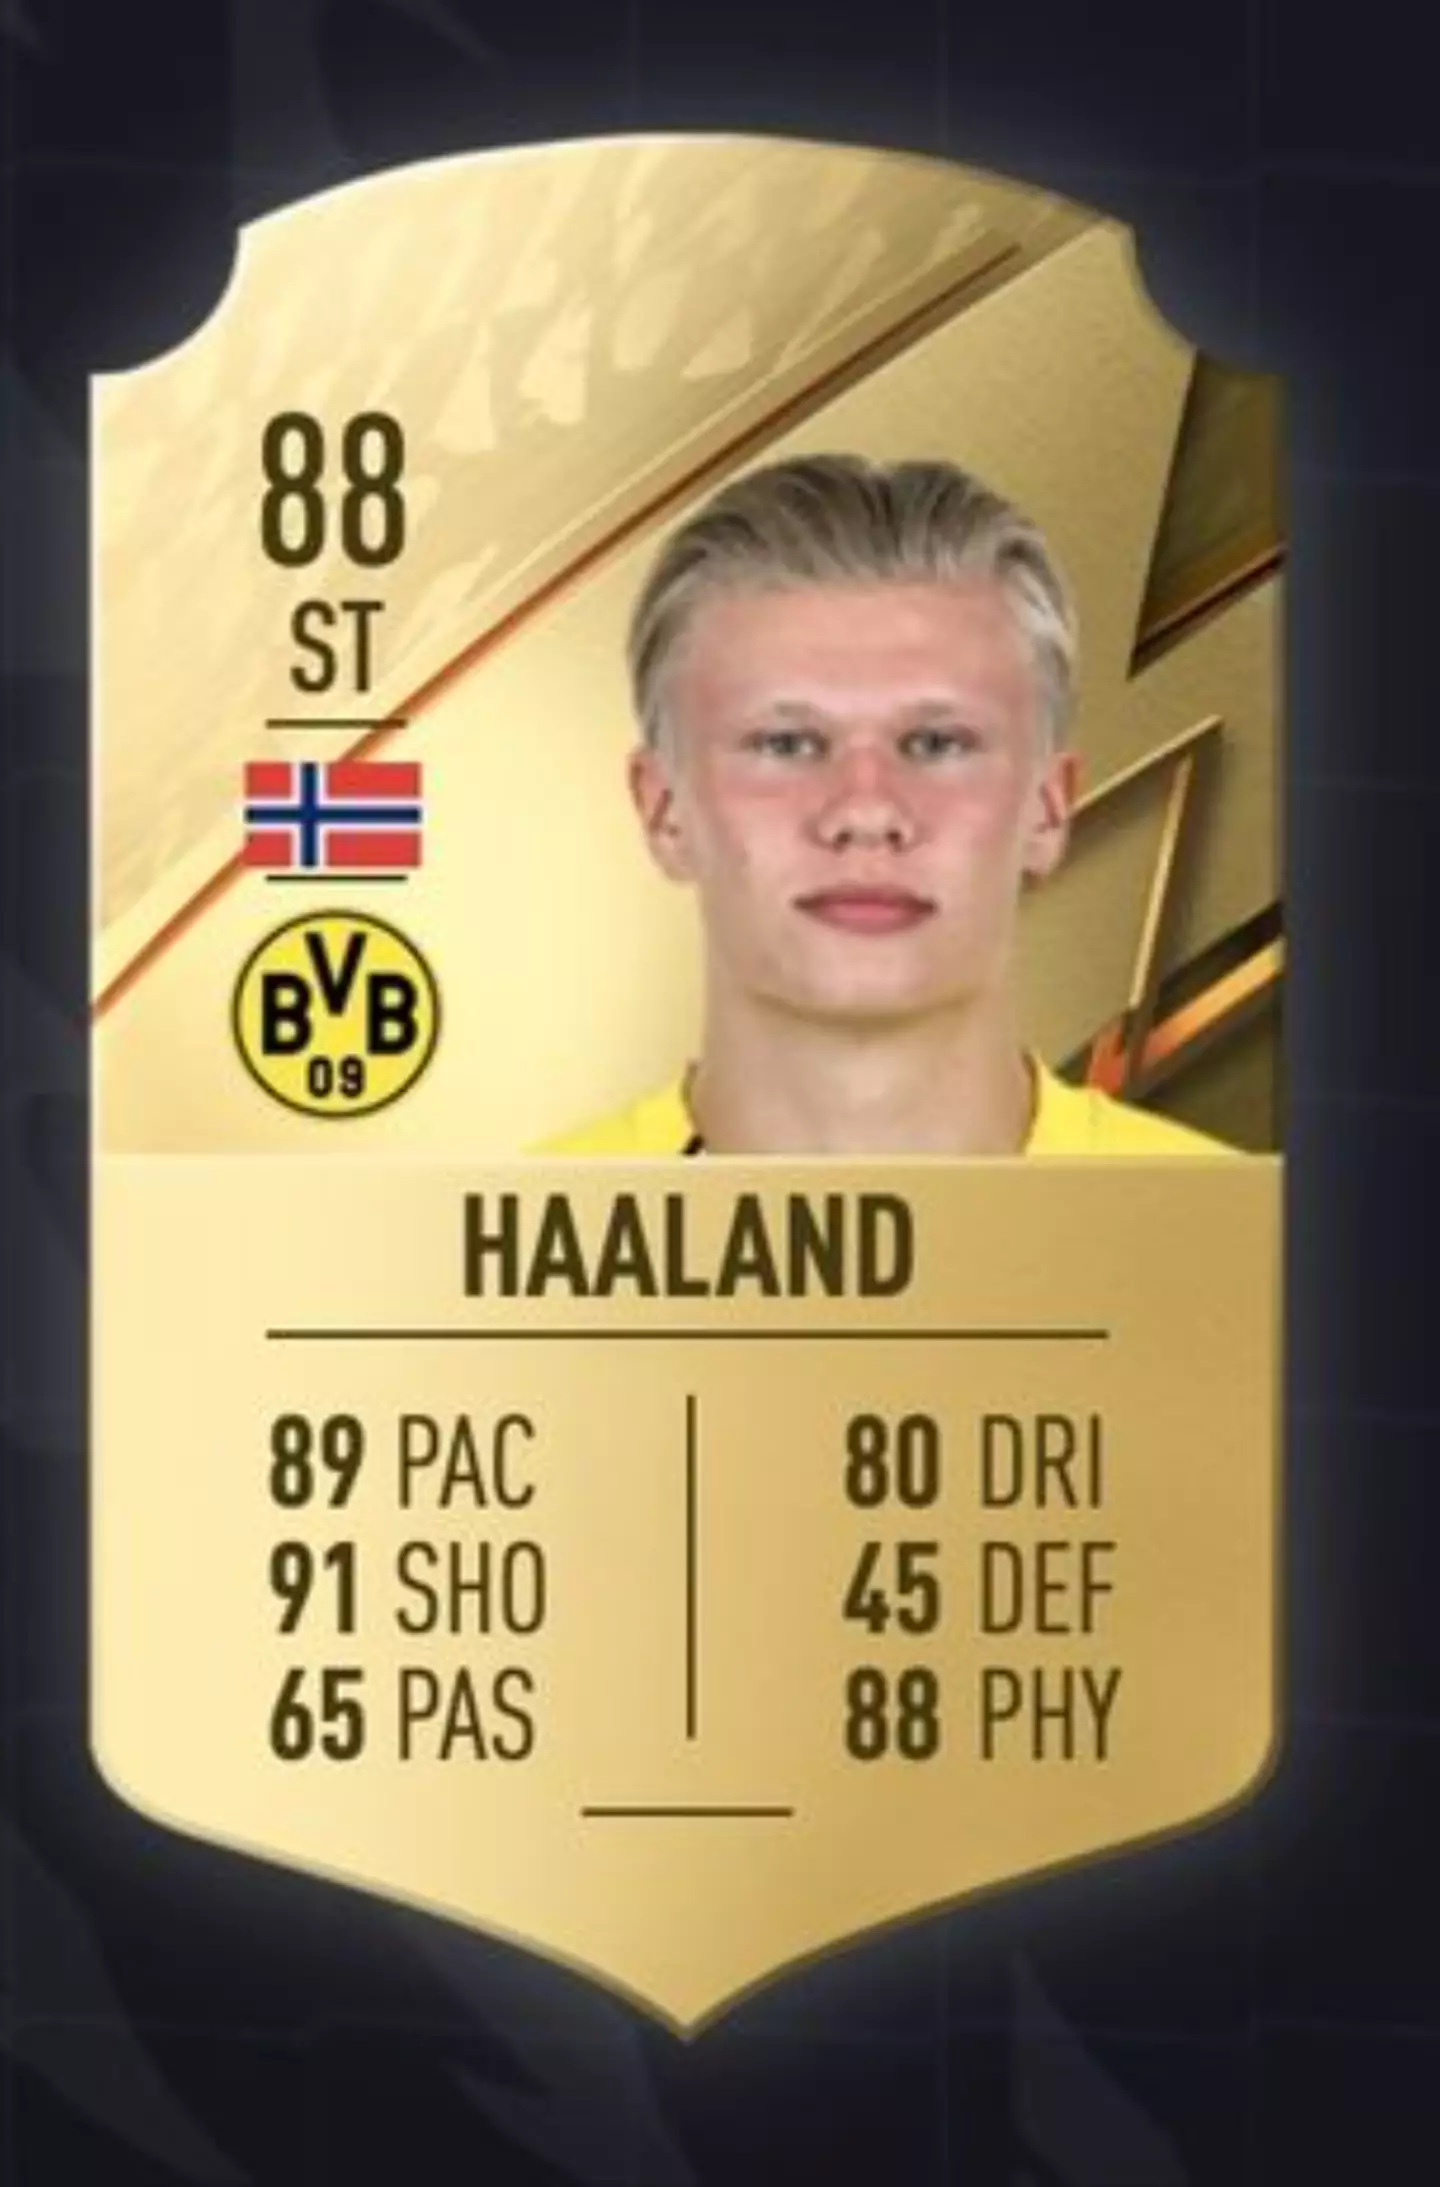 Since his addition in the FIFA game series, Haaland's player rating has increased by 30 ratings from being a bronze